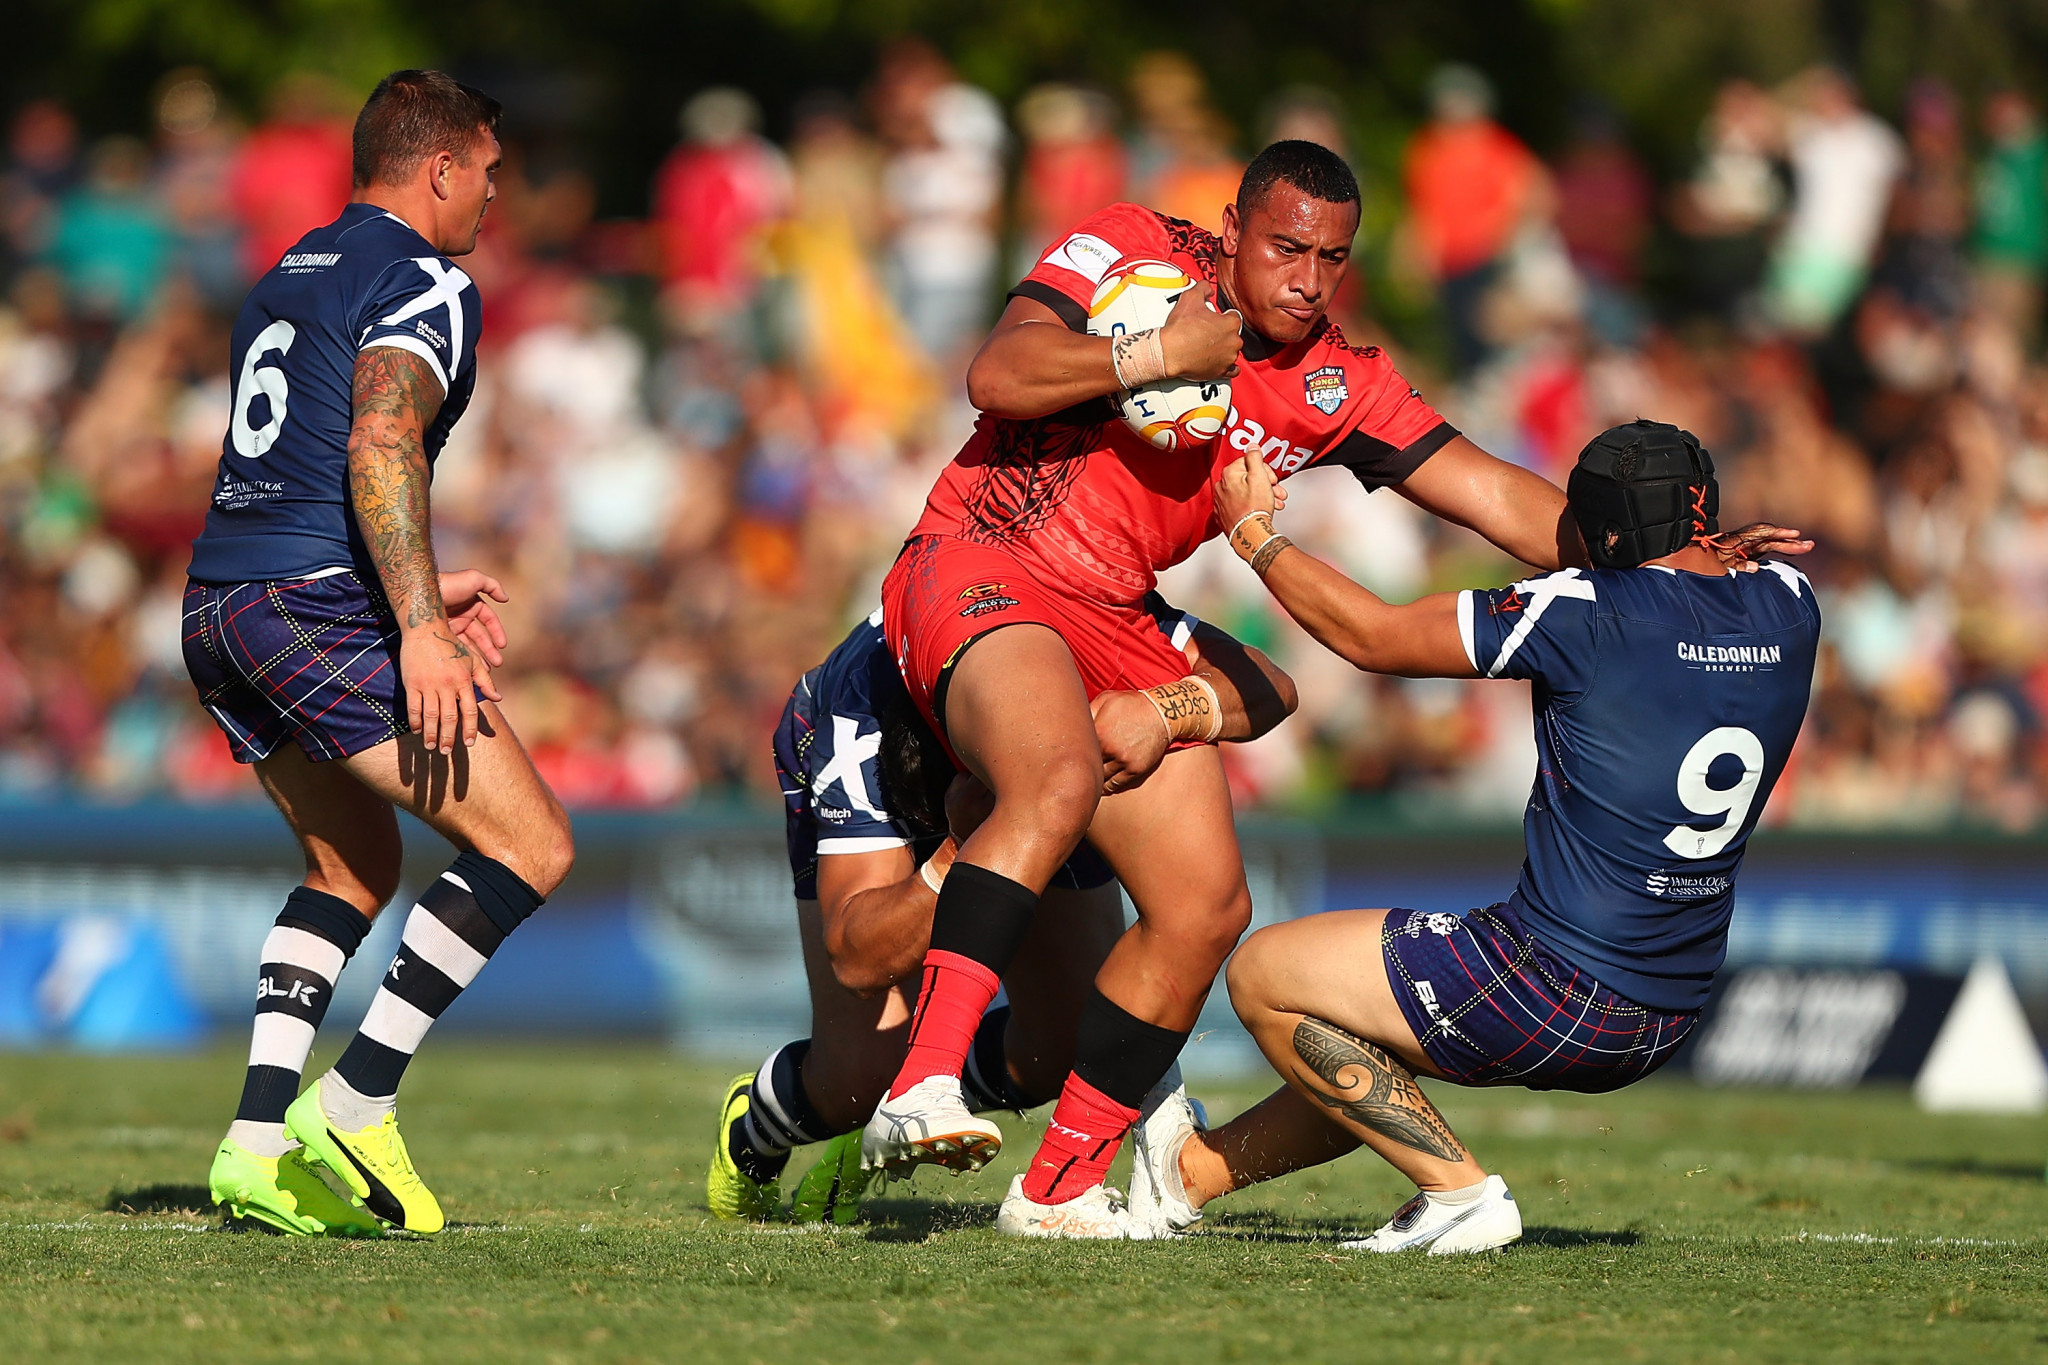 Tonga overwhelmed Scotland today at the Rugby League World Cup ©Getty Images